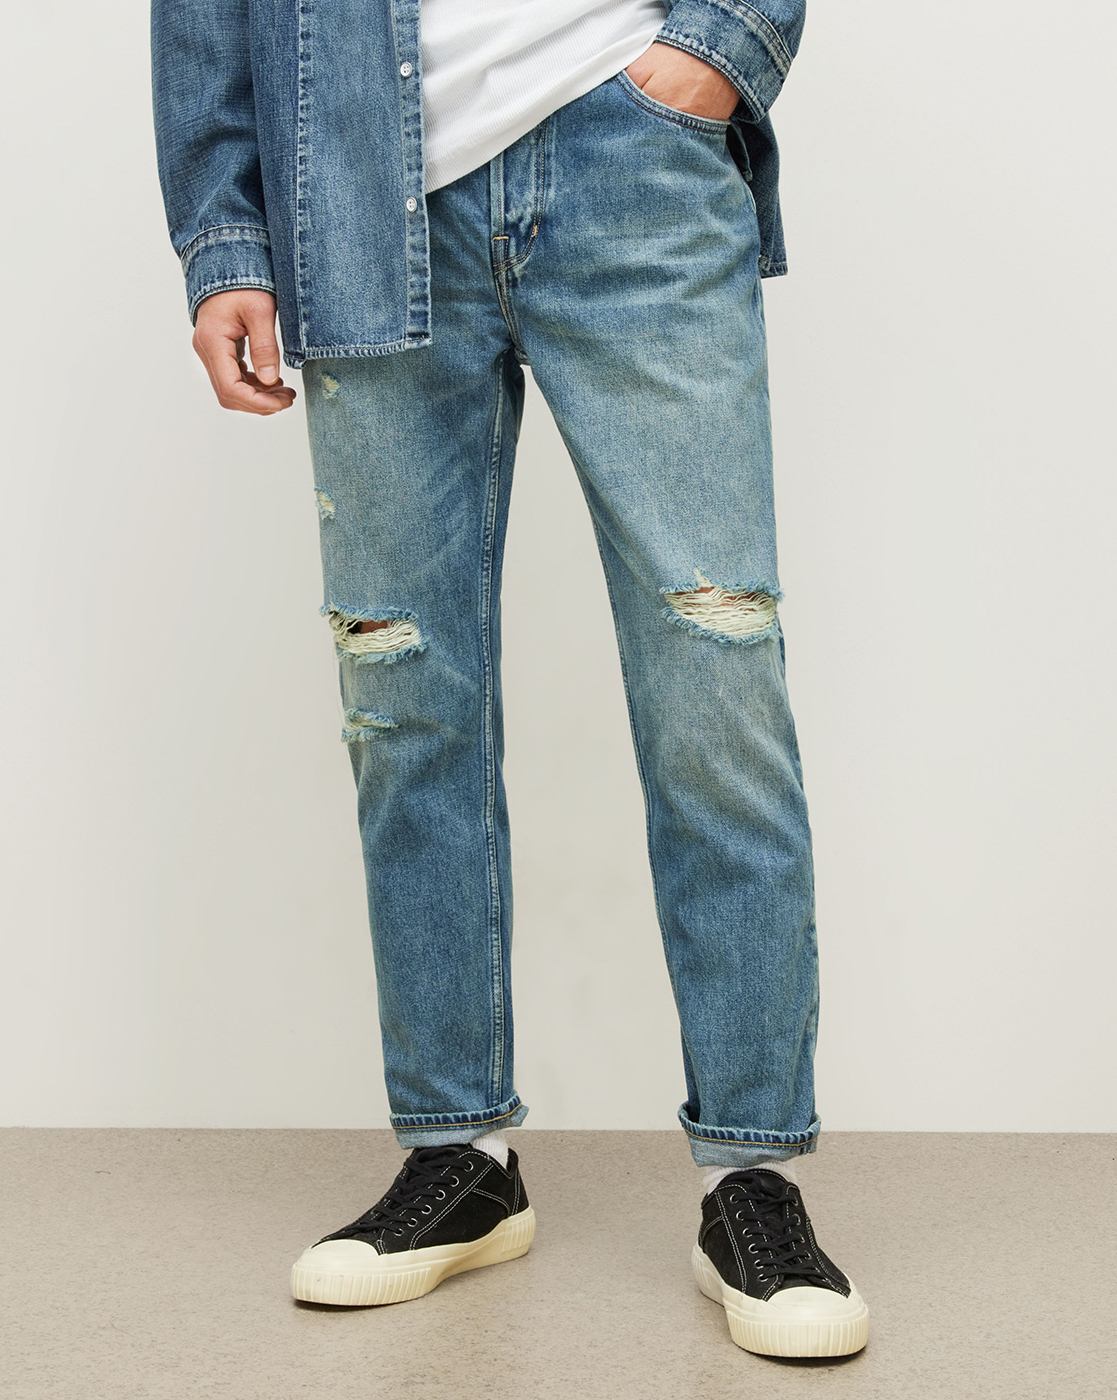 Buy TDFPATLOON Patloon Men Jeans Online at Best Prices in India - JioMart.